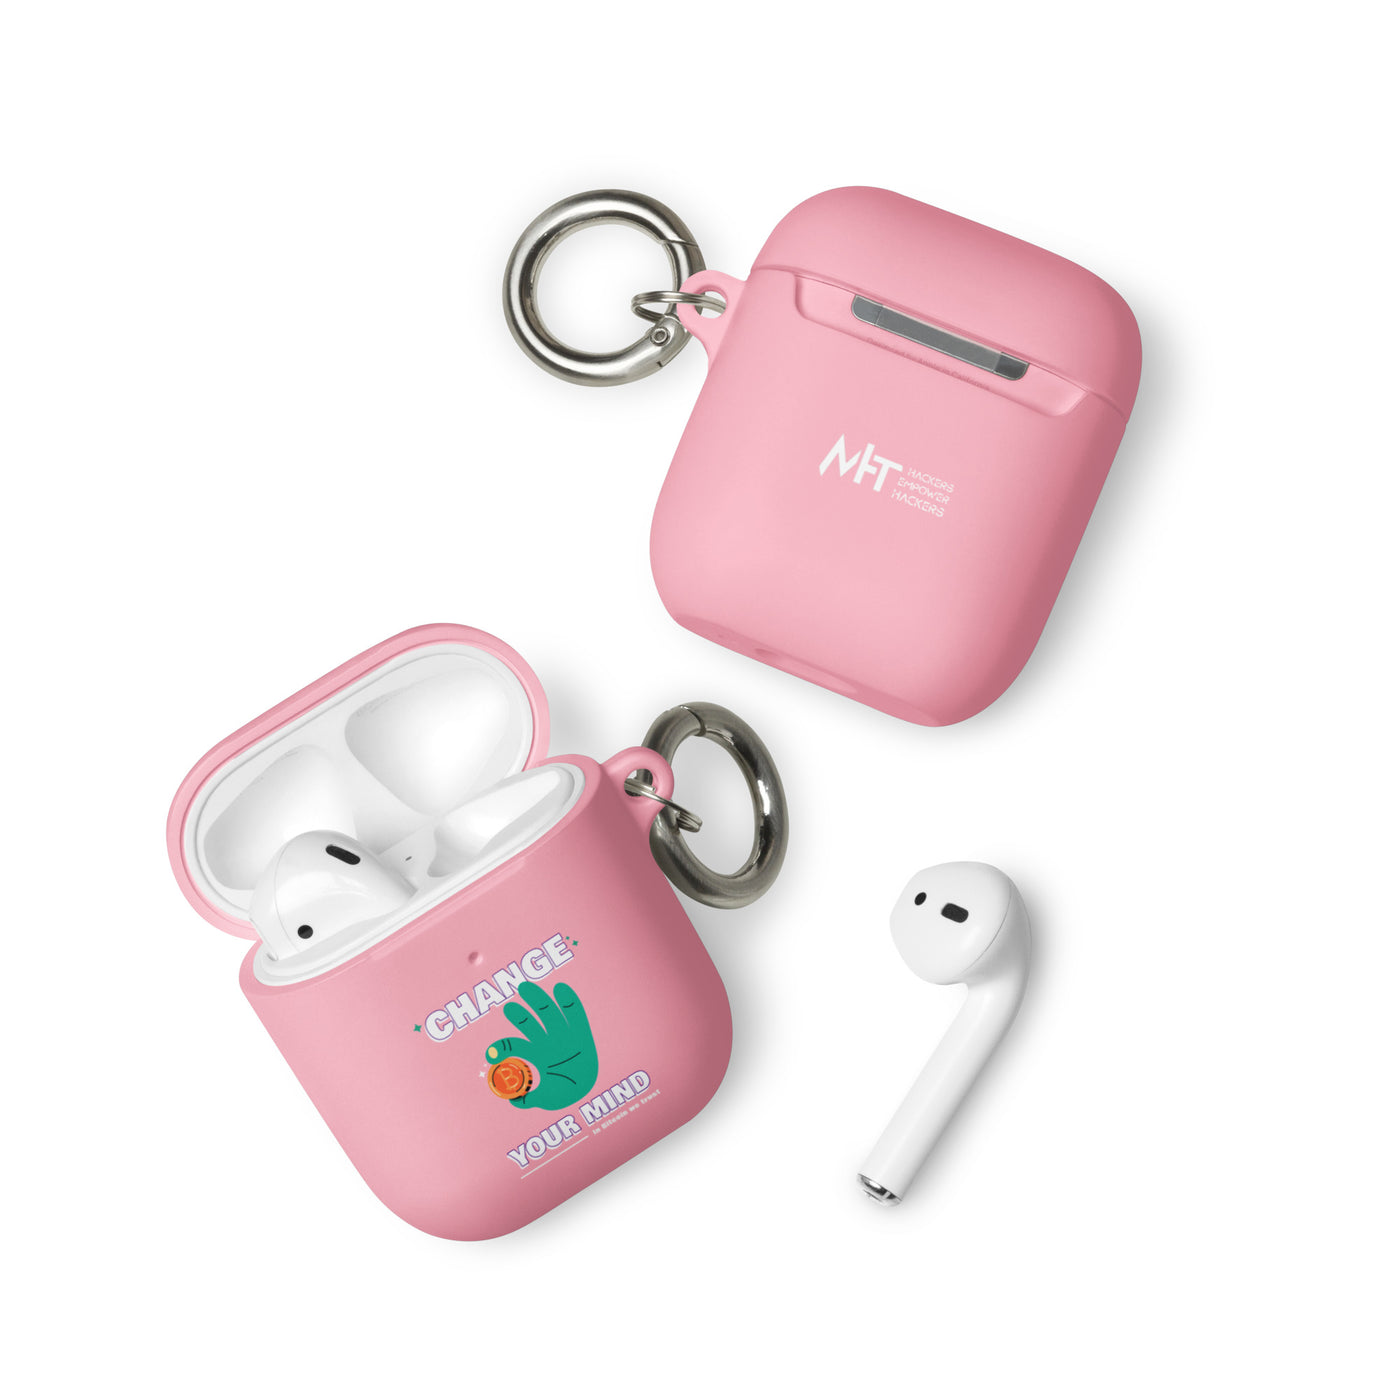 Change your mind in Bitcoin we Trust - AirPods case